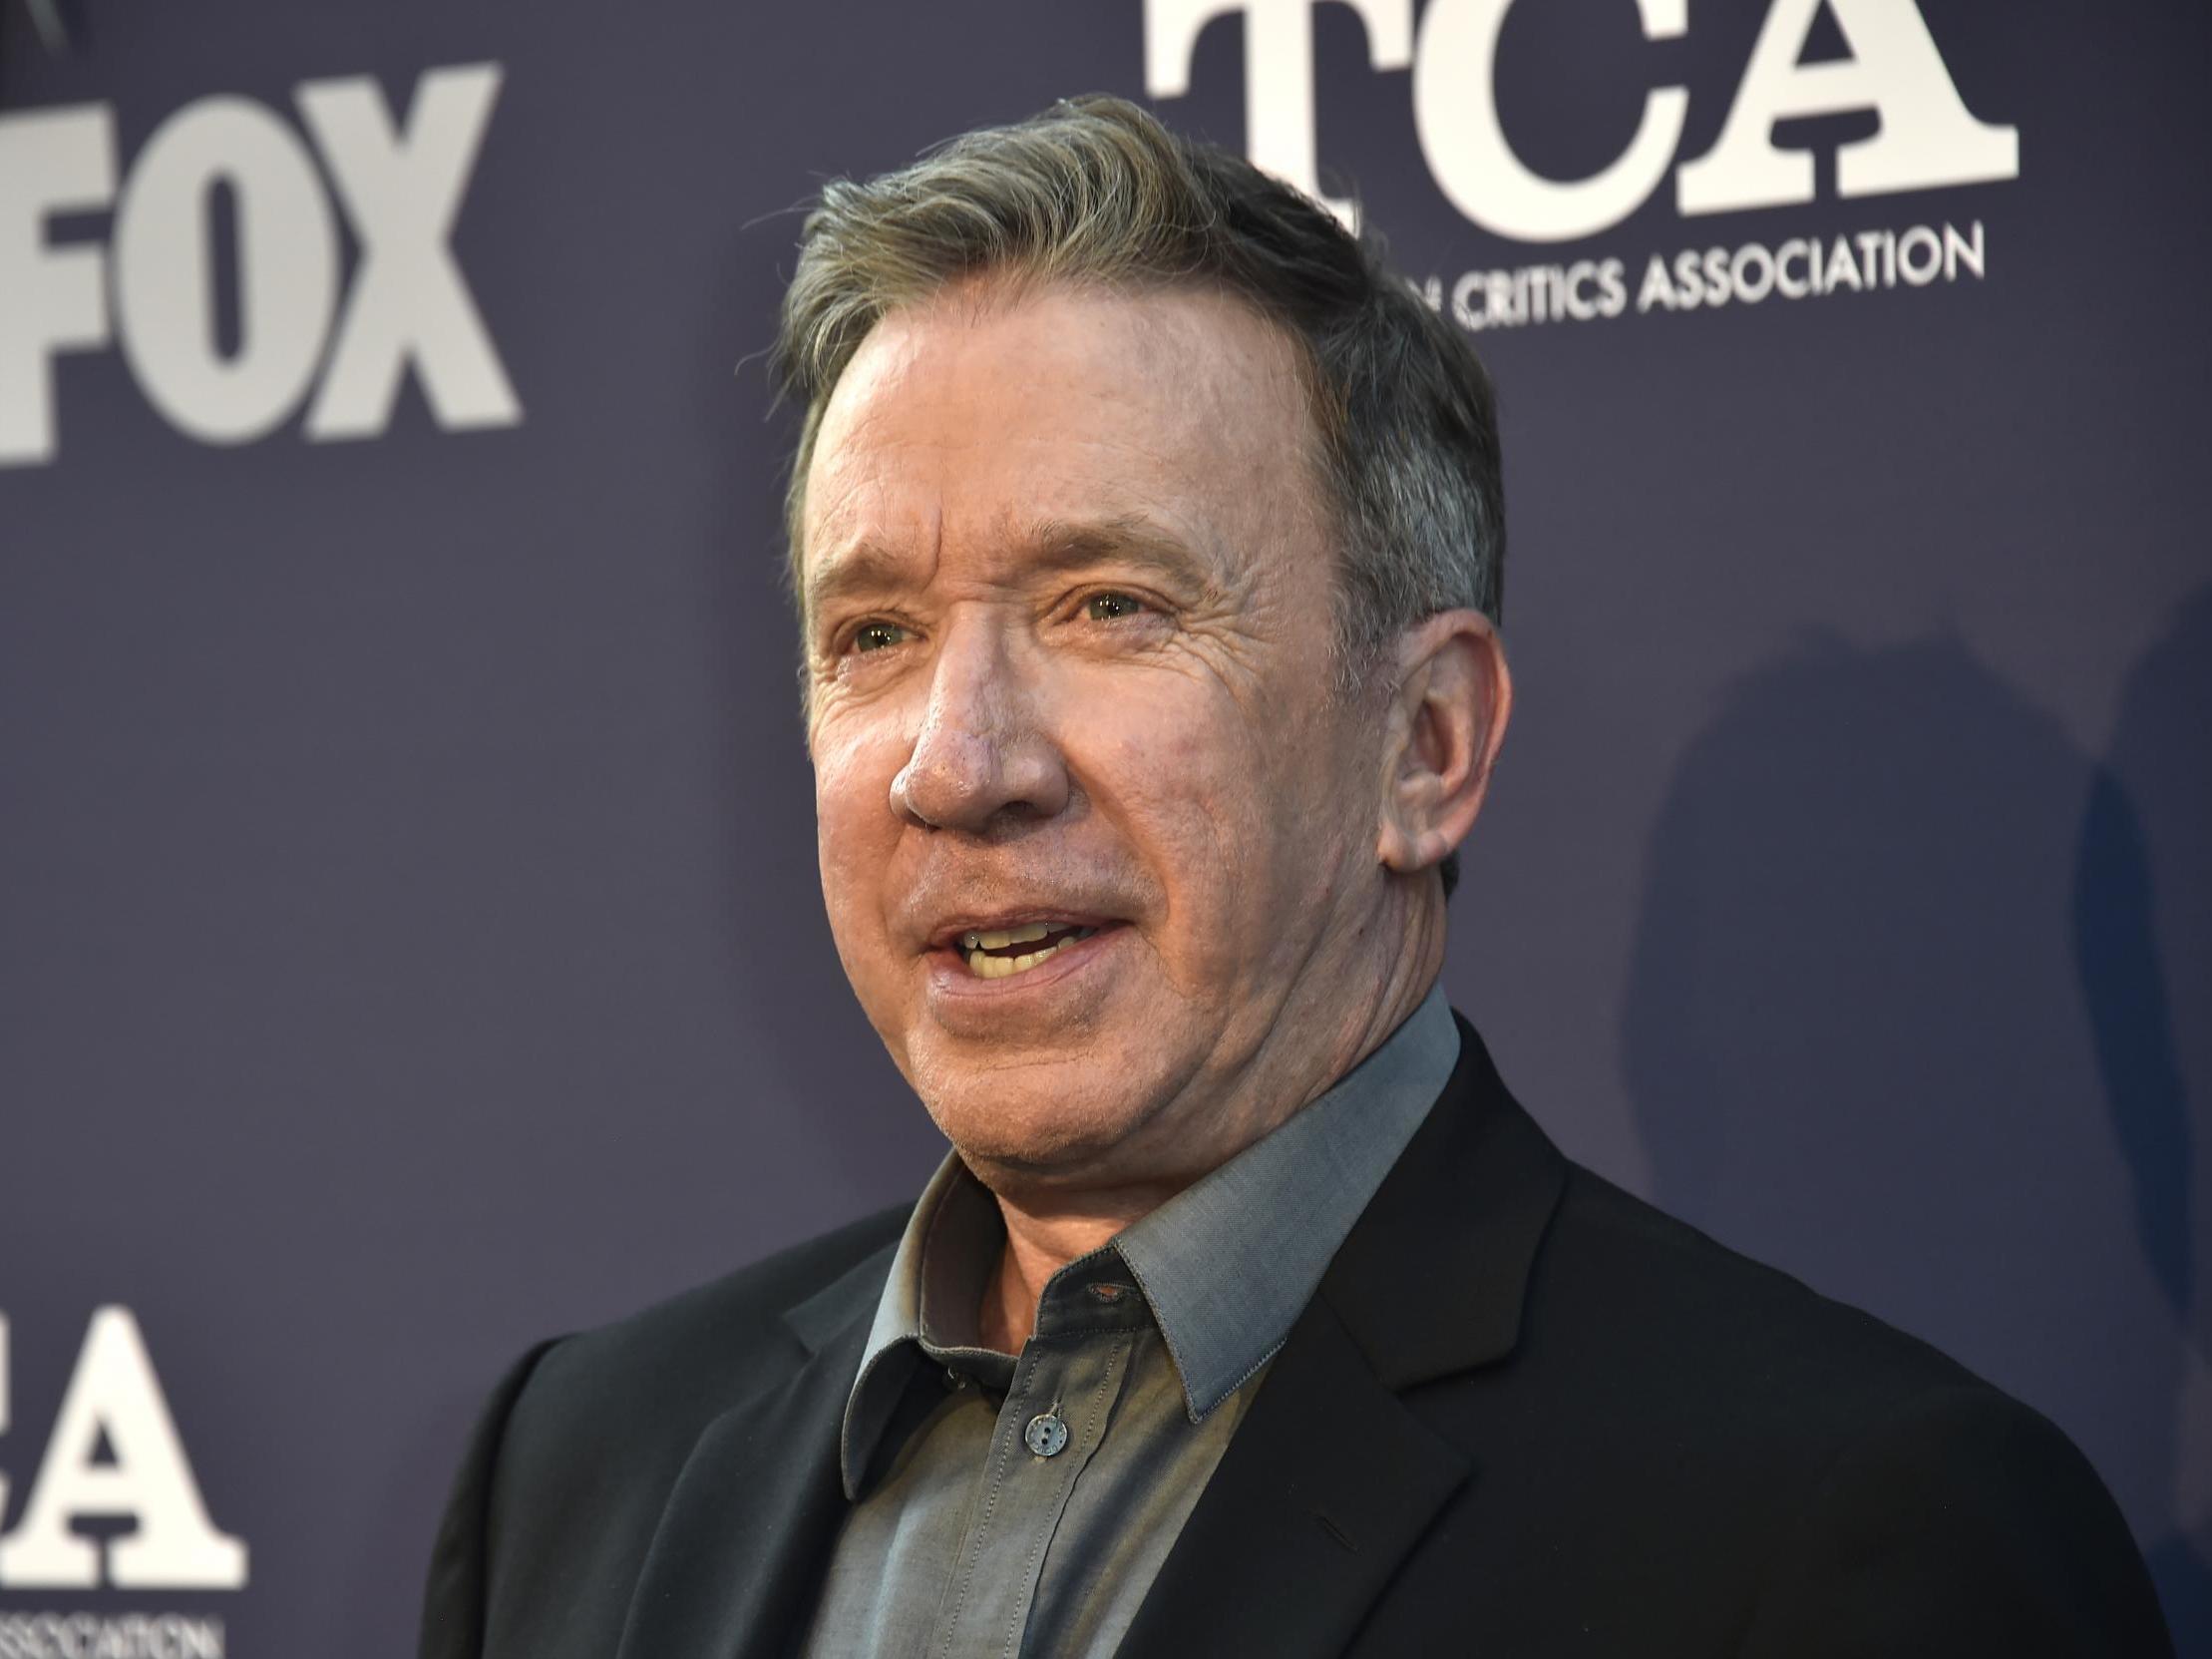 Tim Allen condemns 'thought police' and says they're ruining comedy